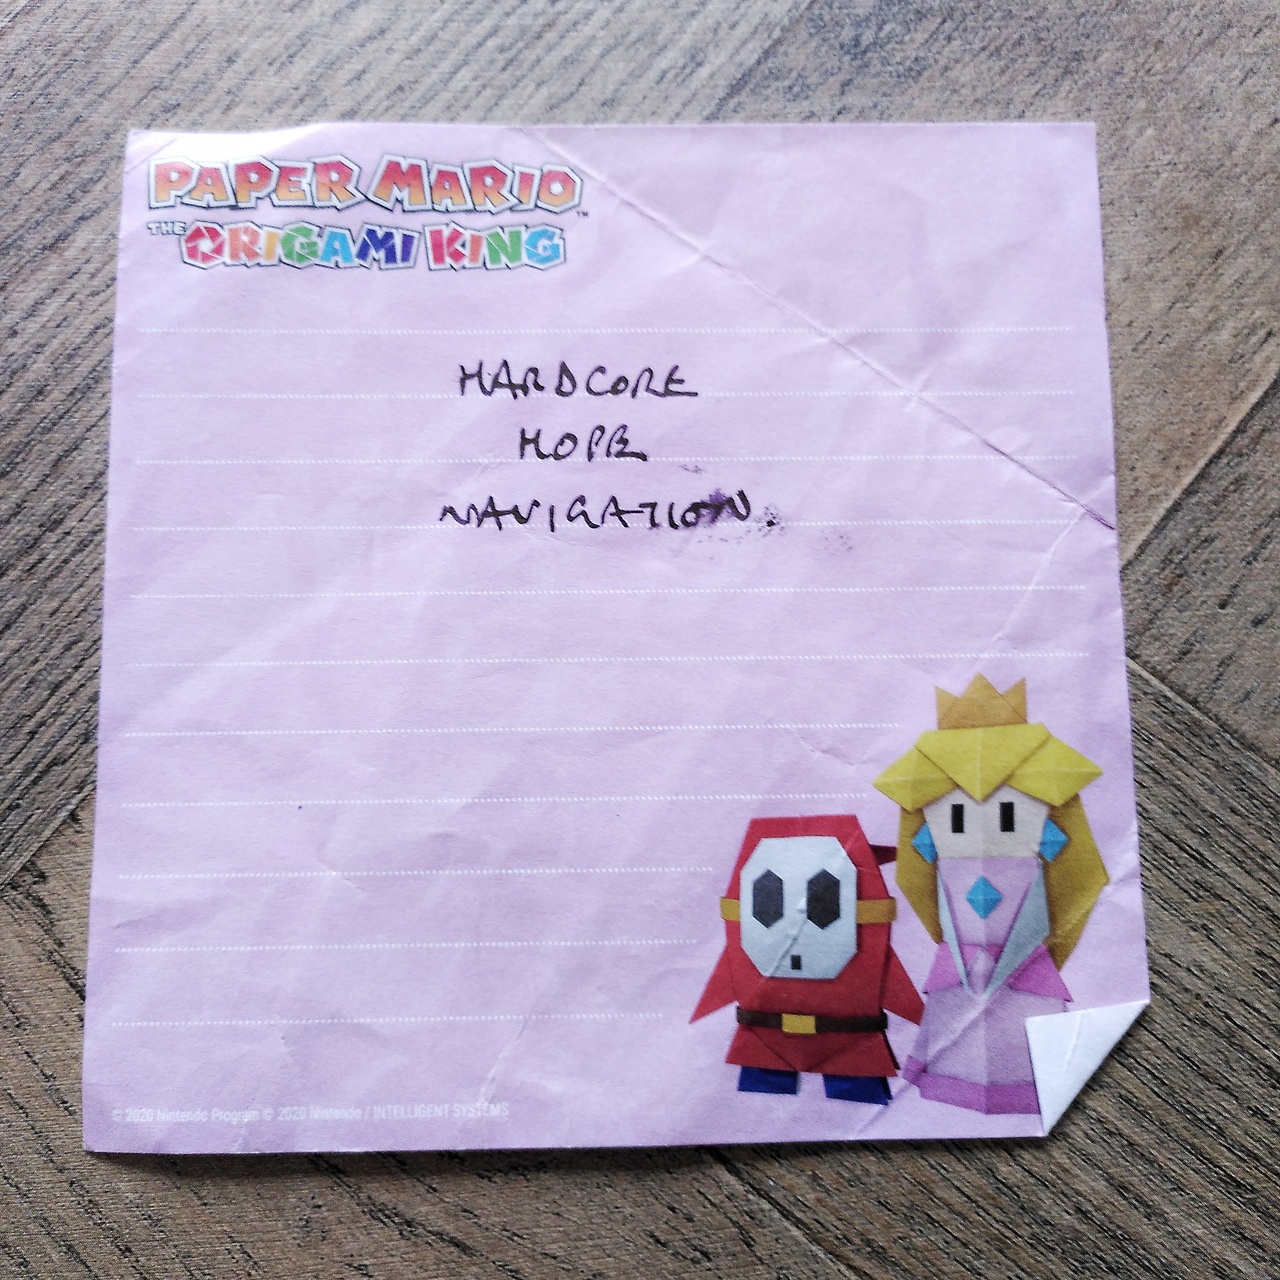 A piece of Paper Mario branded paper with the words 